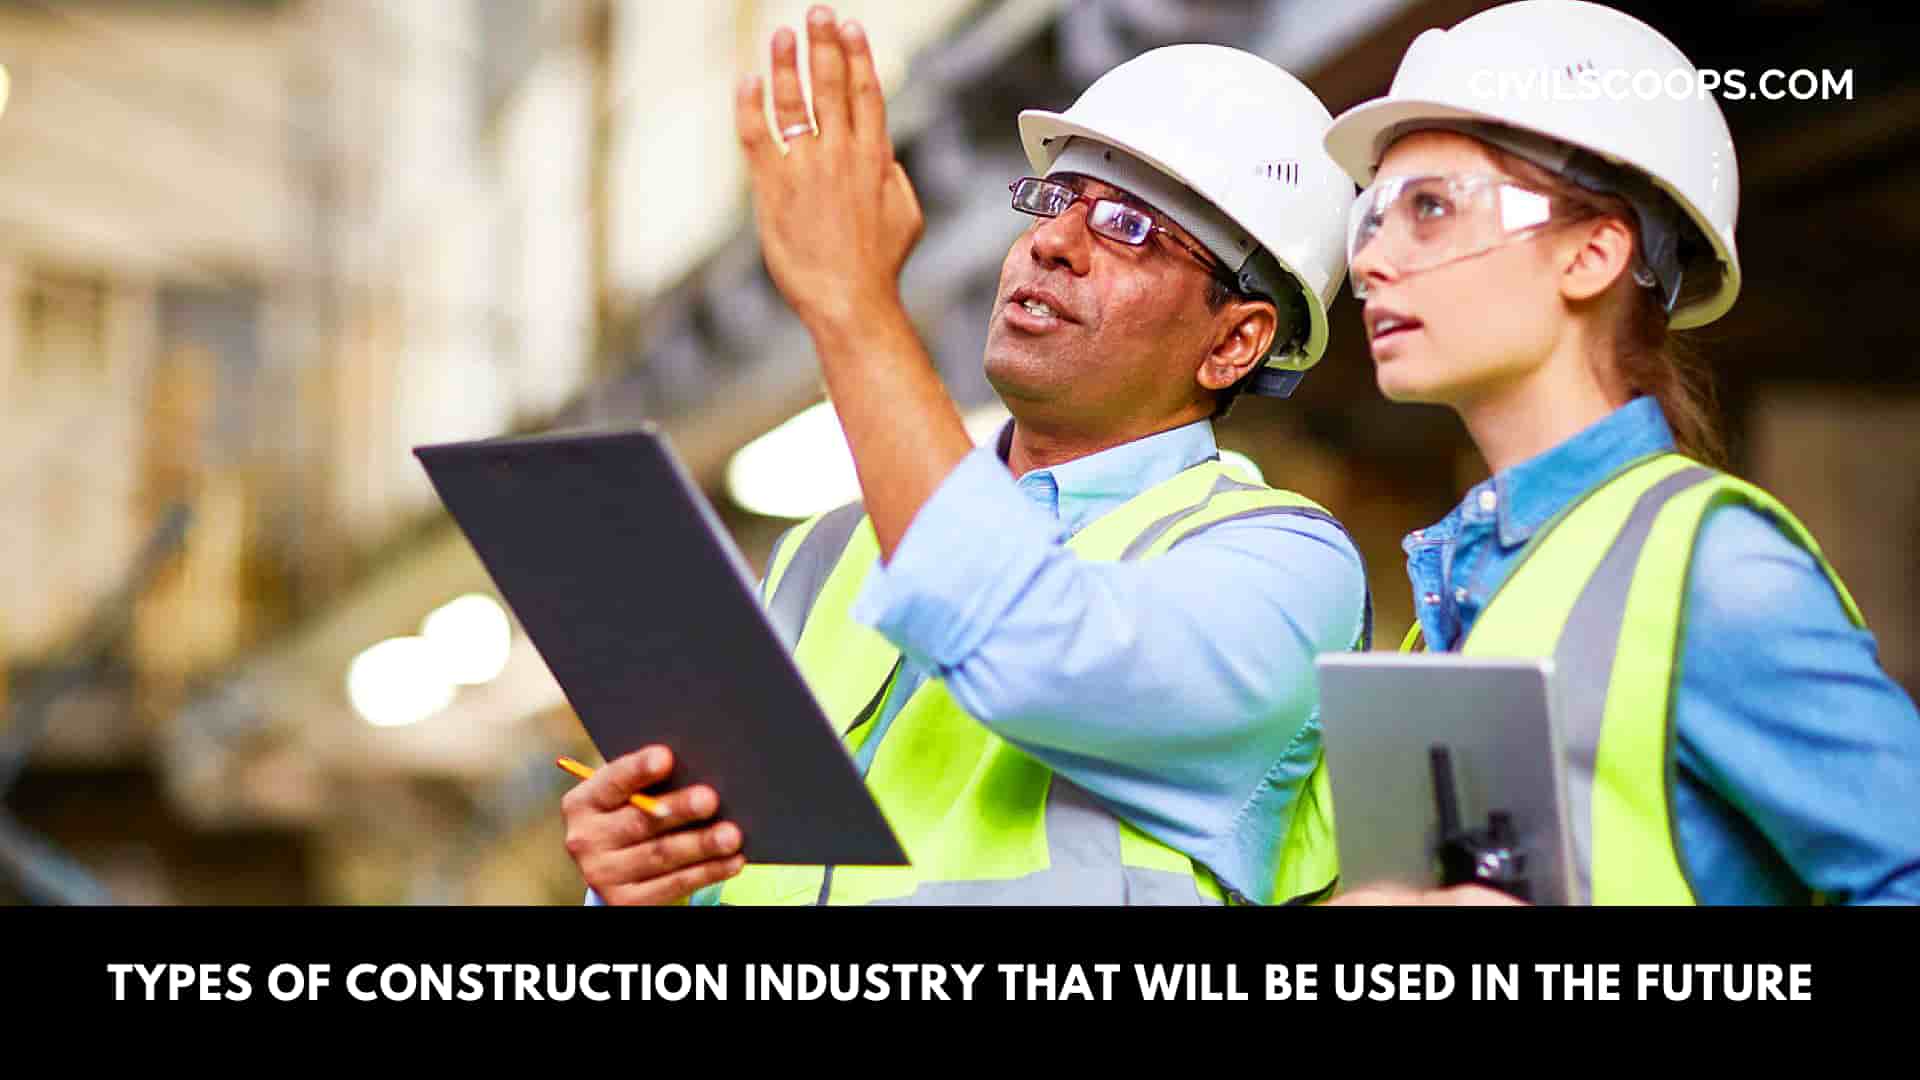 Types of Construction Industry That Will Be Used in the Future